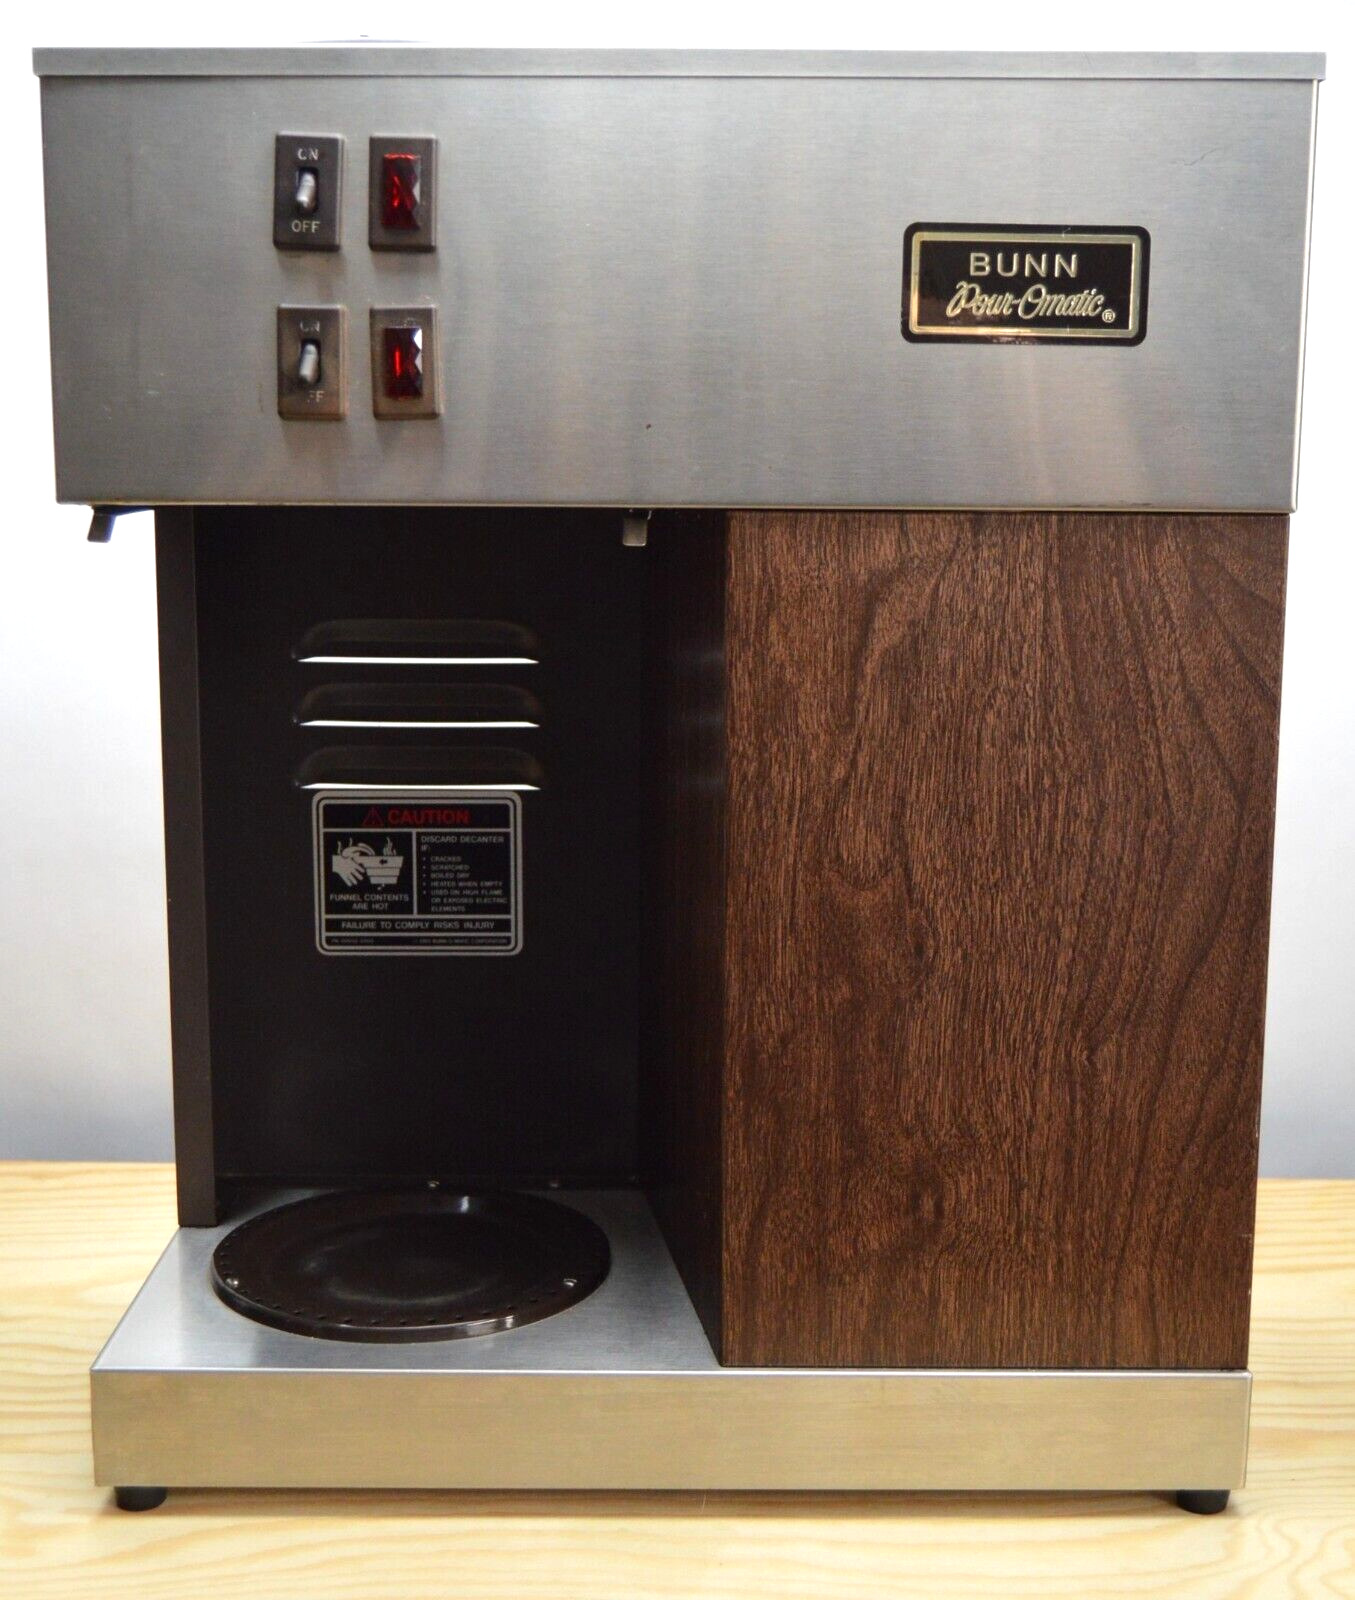 Bunn Pour-Omatic VPR 04276-0017 Commercial Coffee Maker Only Vintage Dual Burner